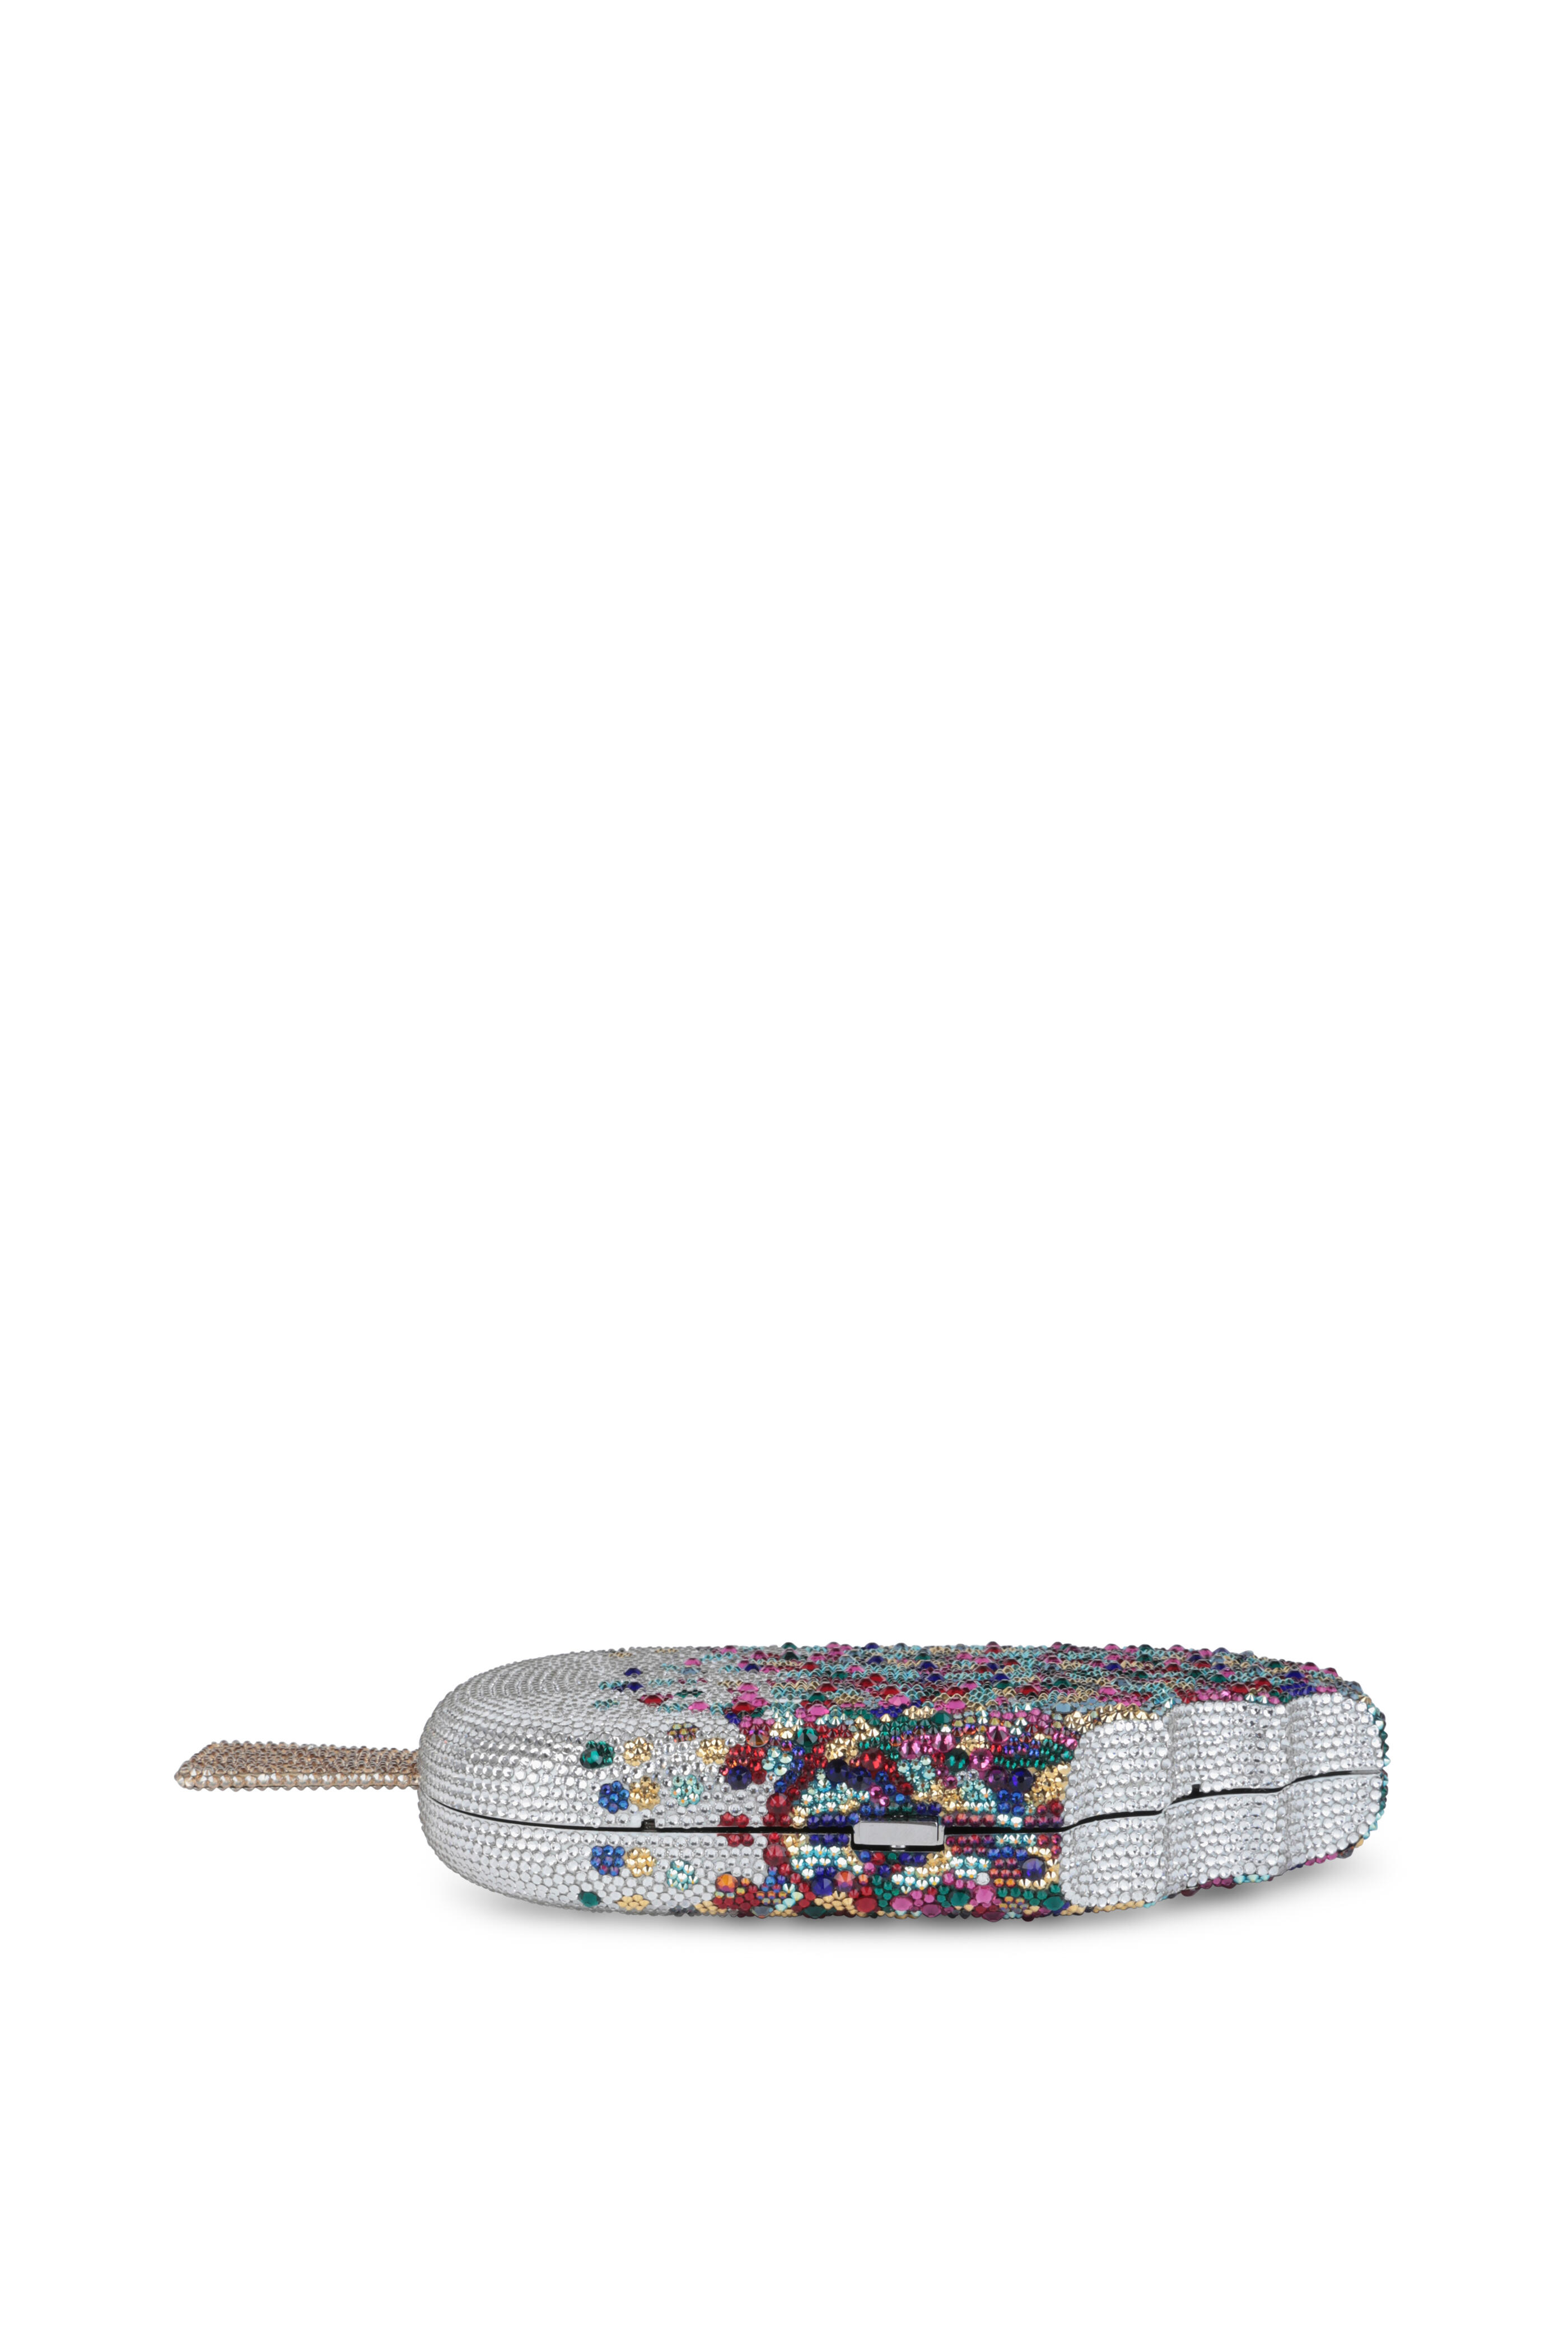 JUDITH LEIBER COUTURE Ice Cream Pint crystal-embellished silver-tone clutch